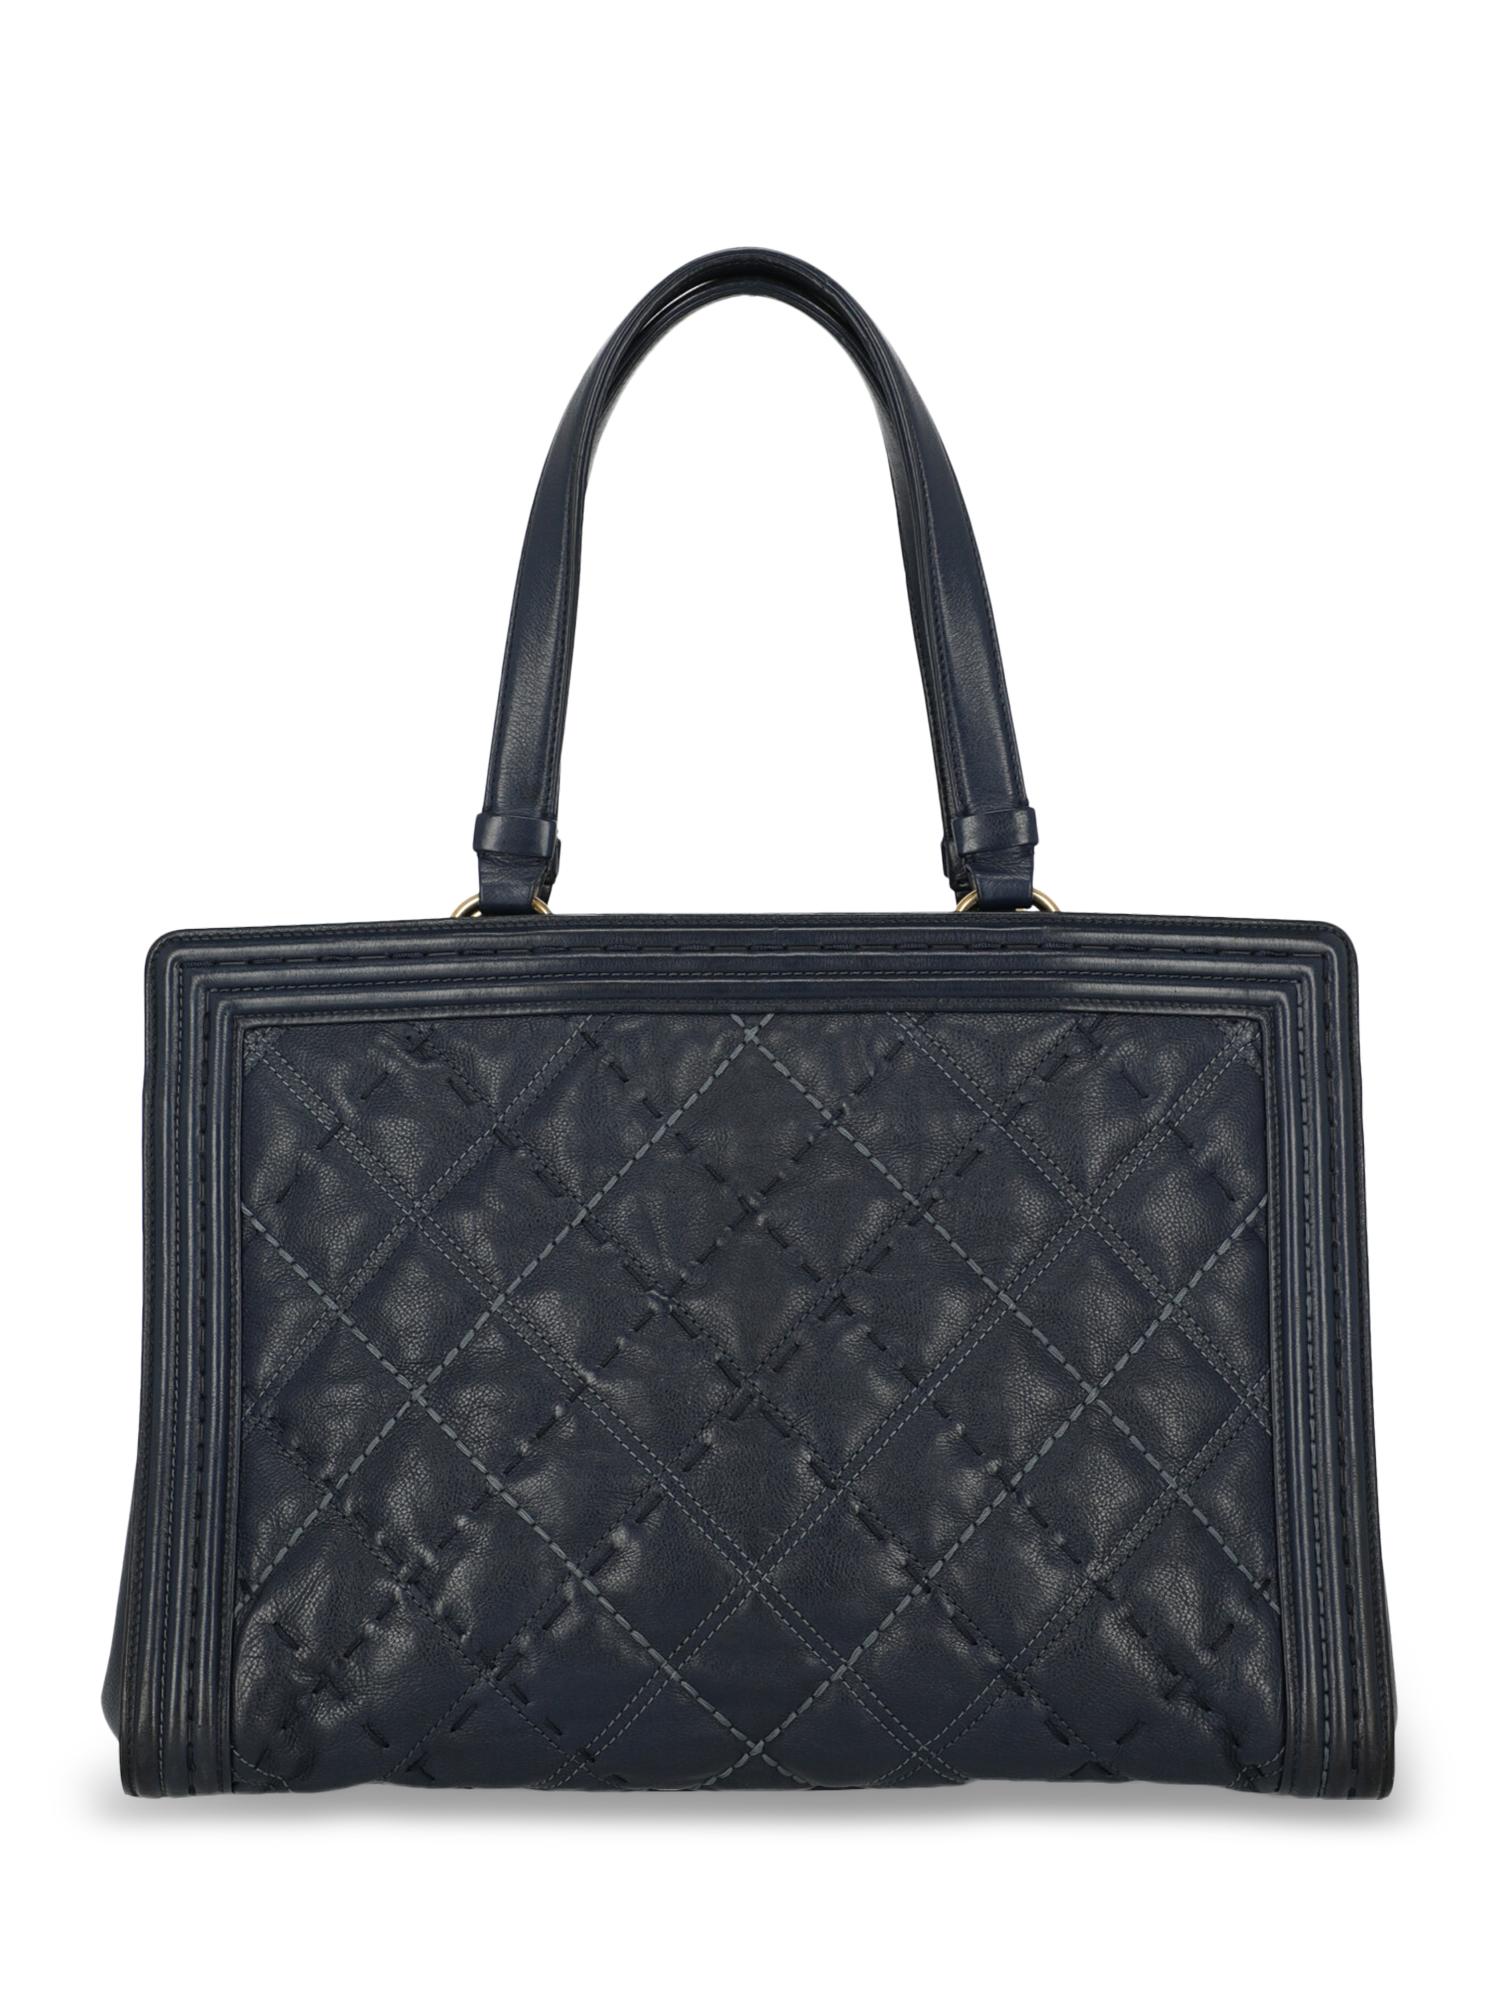 Chanel Woman Boy Tote Navy  In Fair Condition For Sale In Milan, IT